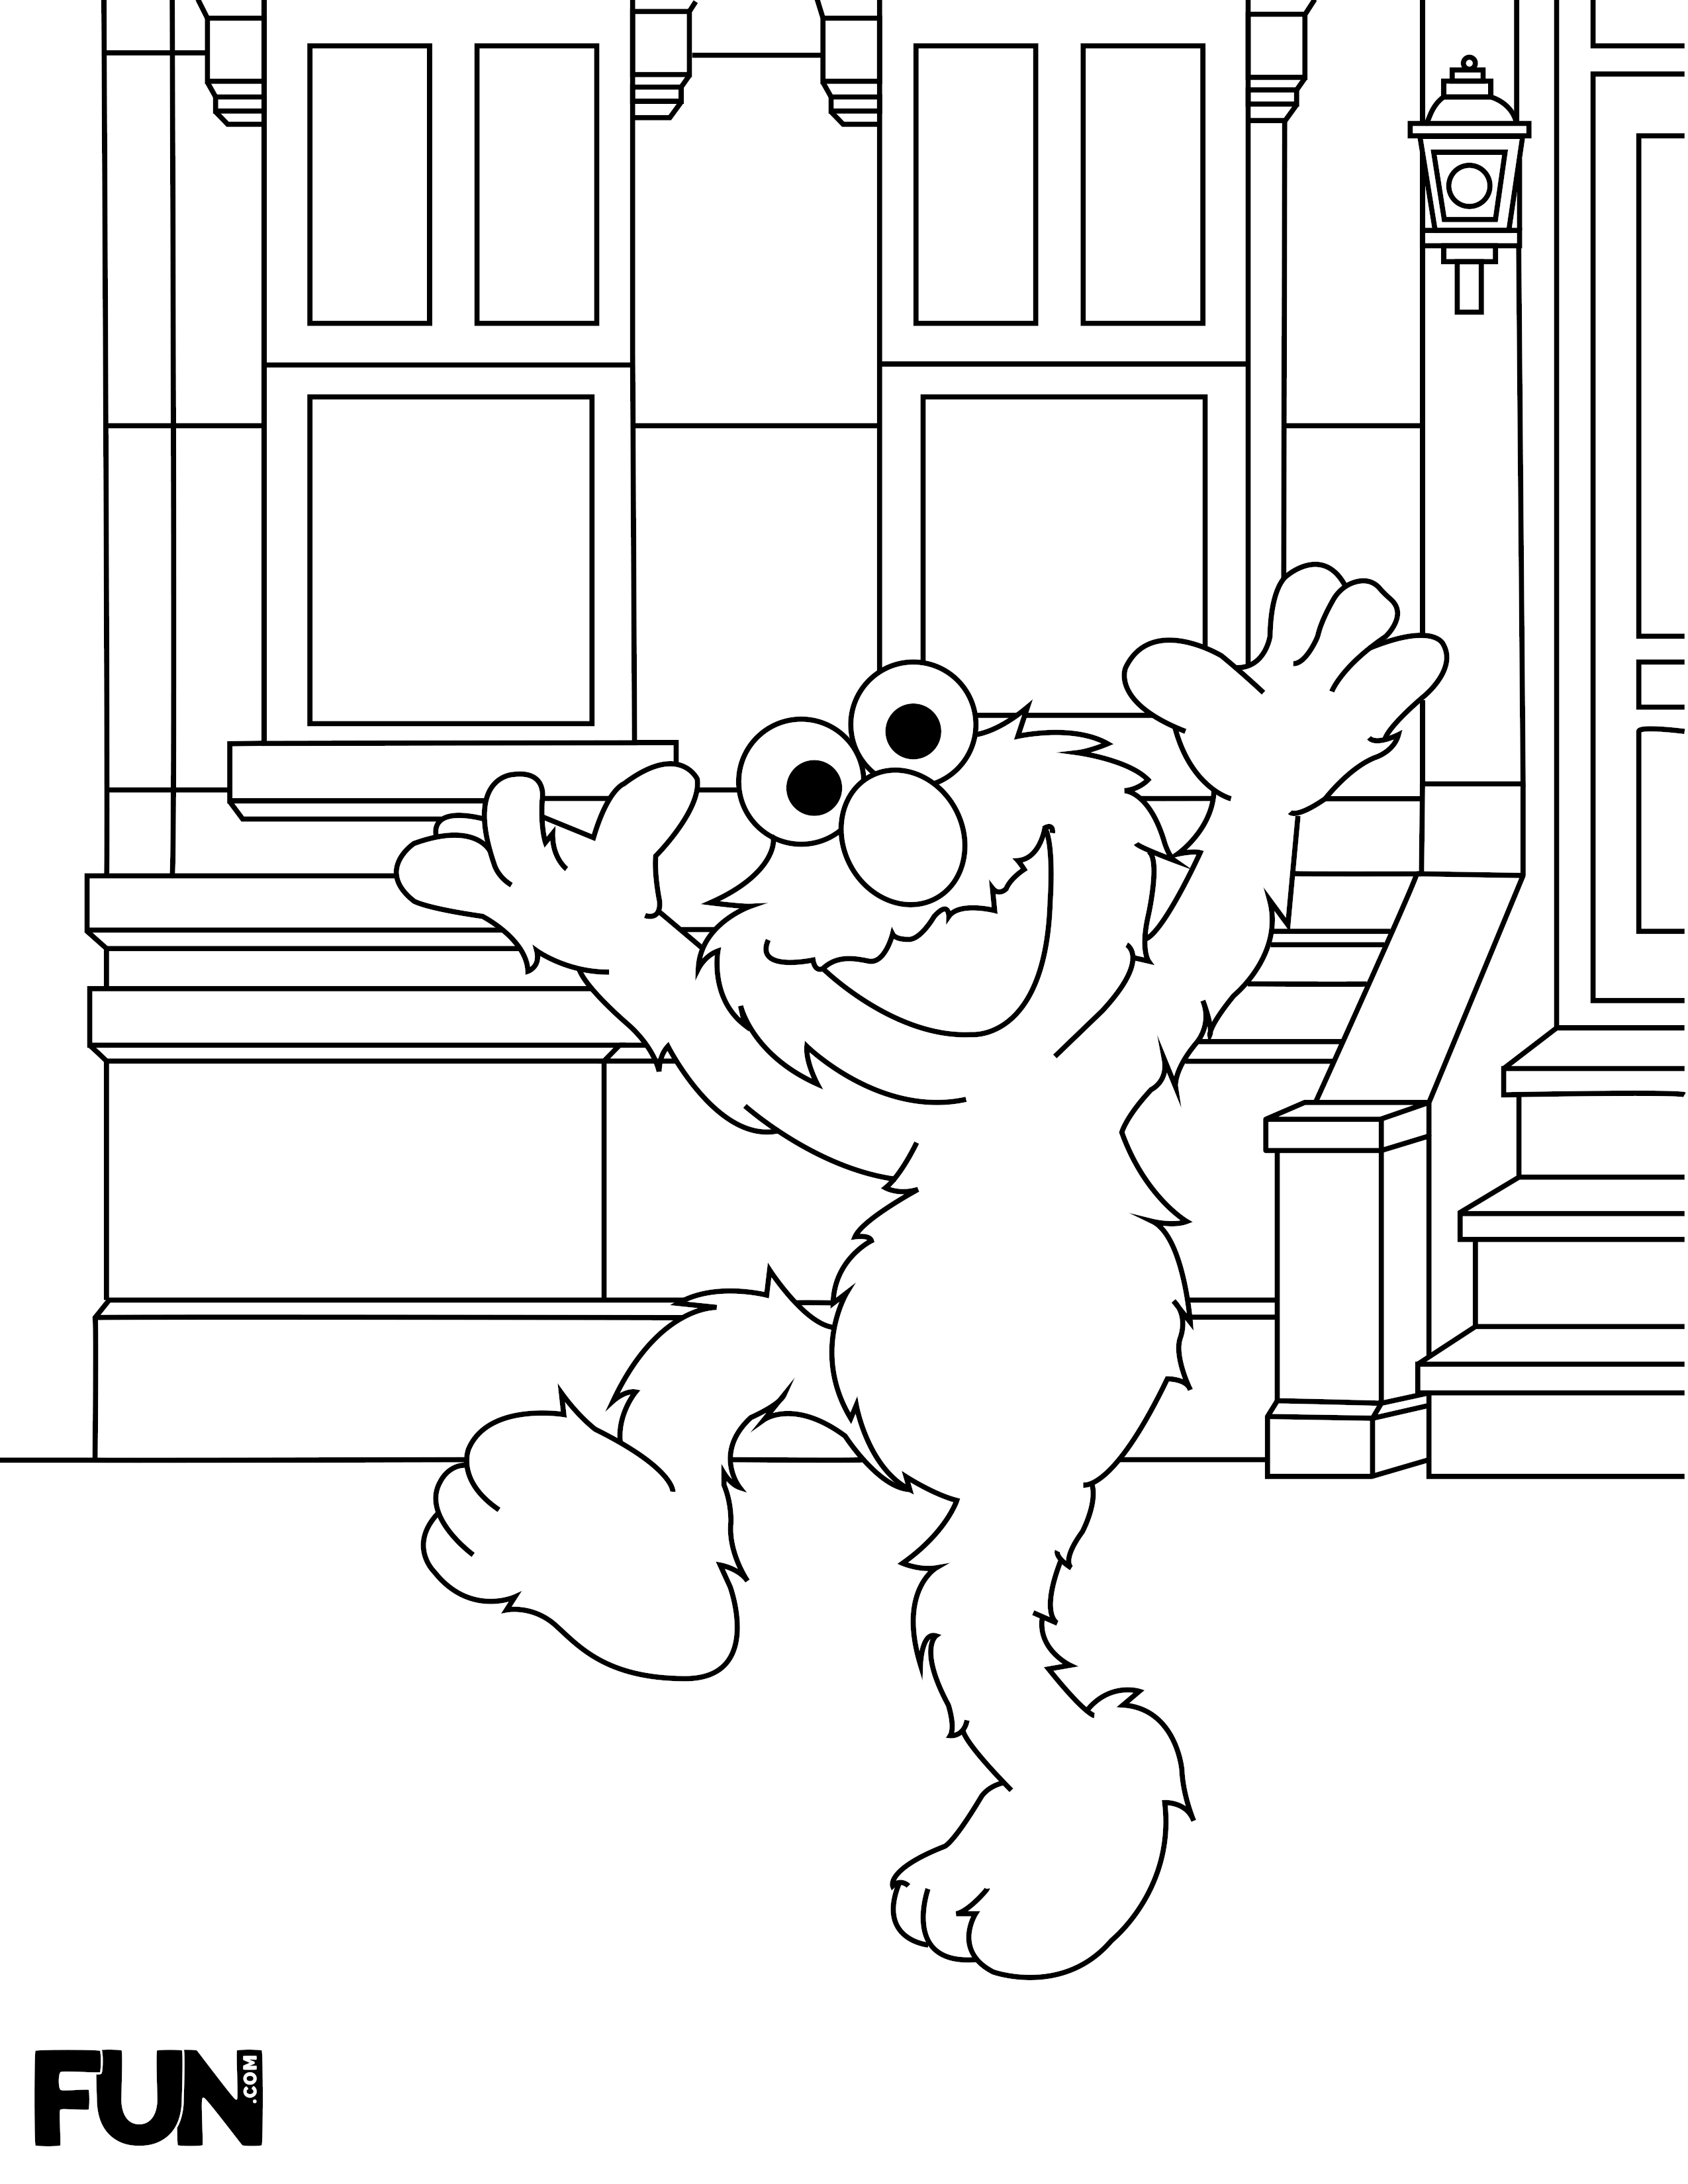 110+ Elmo Coloring Pages: Playful and Educational Fun 2